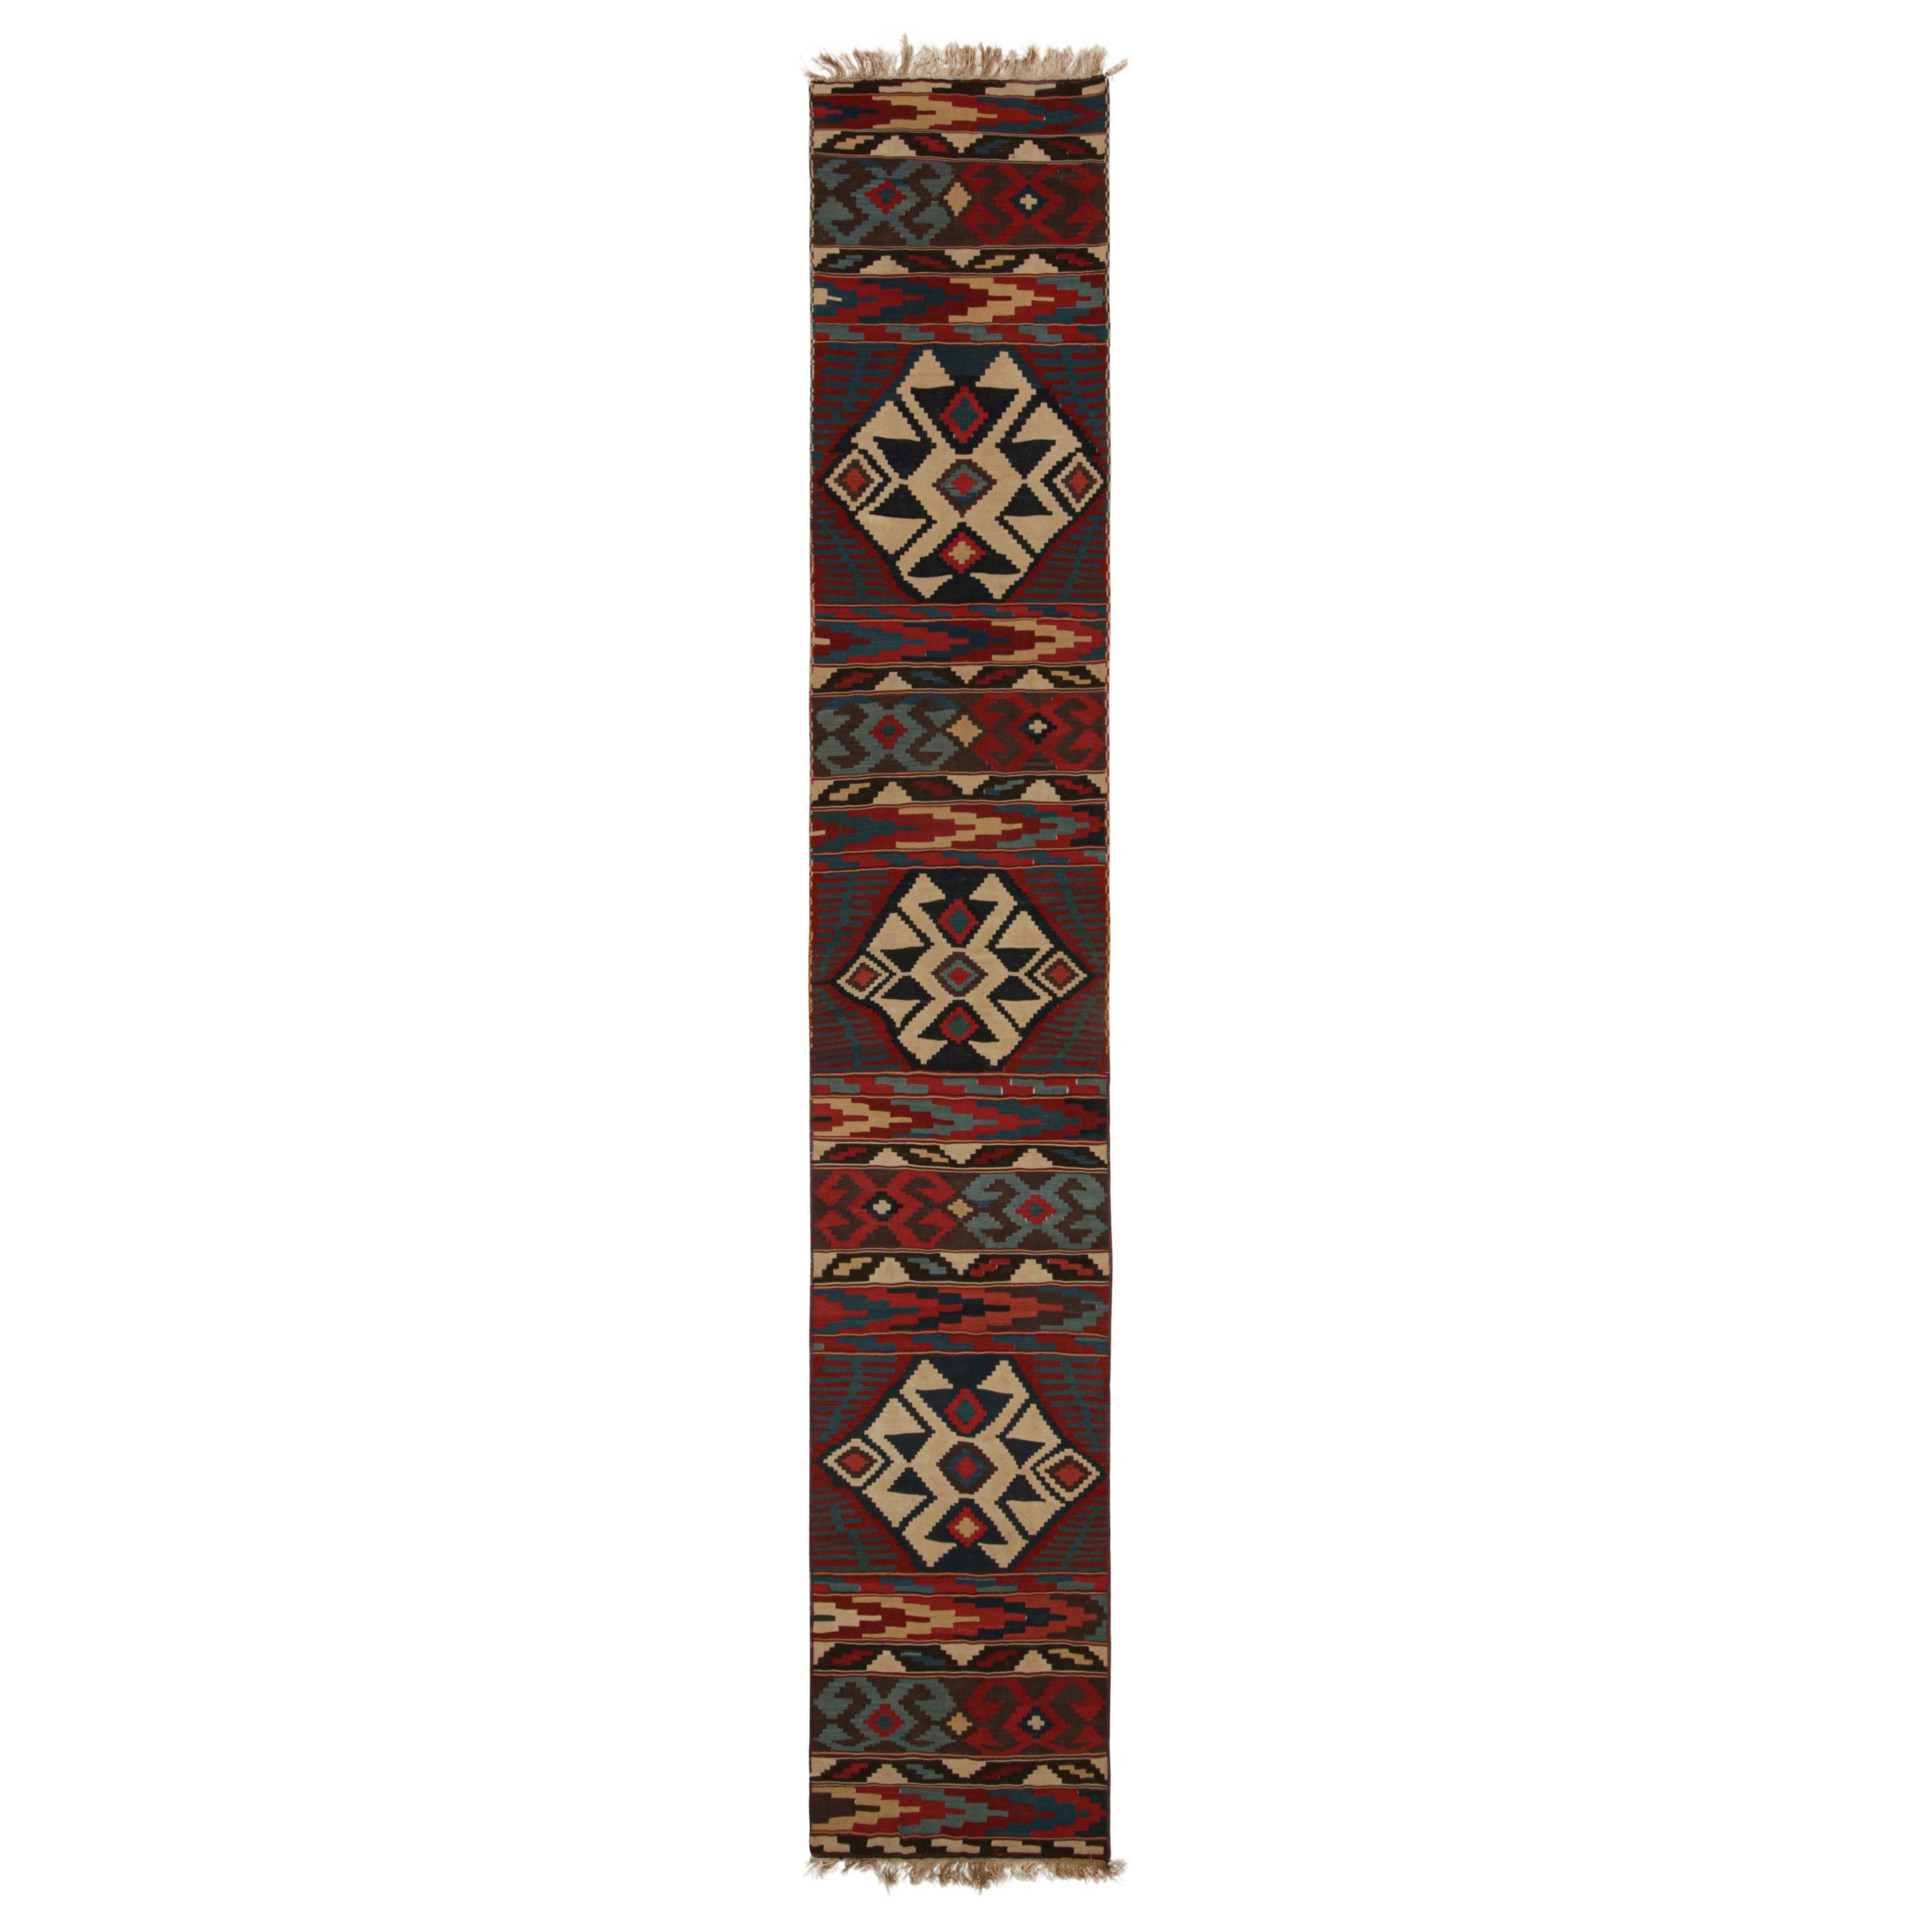 Twin Vintage Persian Kilim Runner Rugs with Geometric Patterns, from Rug & Kilim